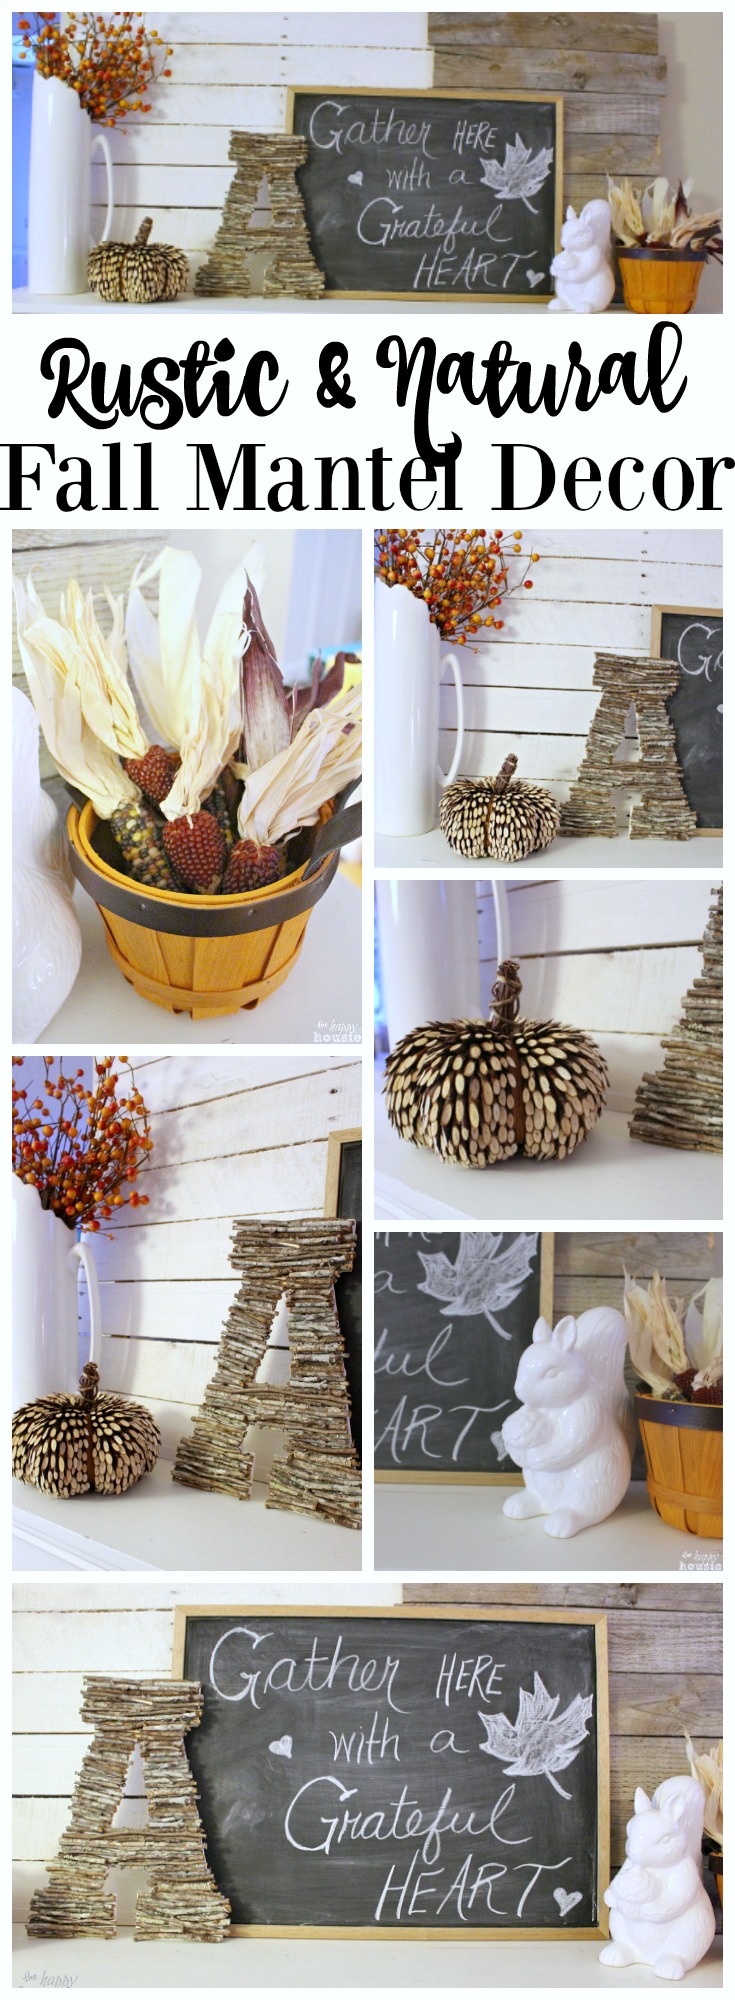 Simple rustic and natural fall mantel decor ideas at thehappyhousie